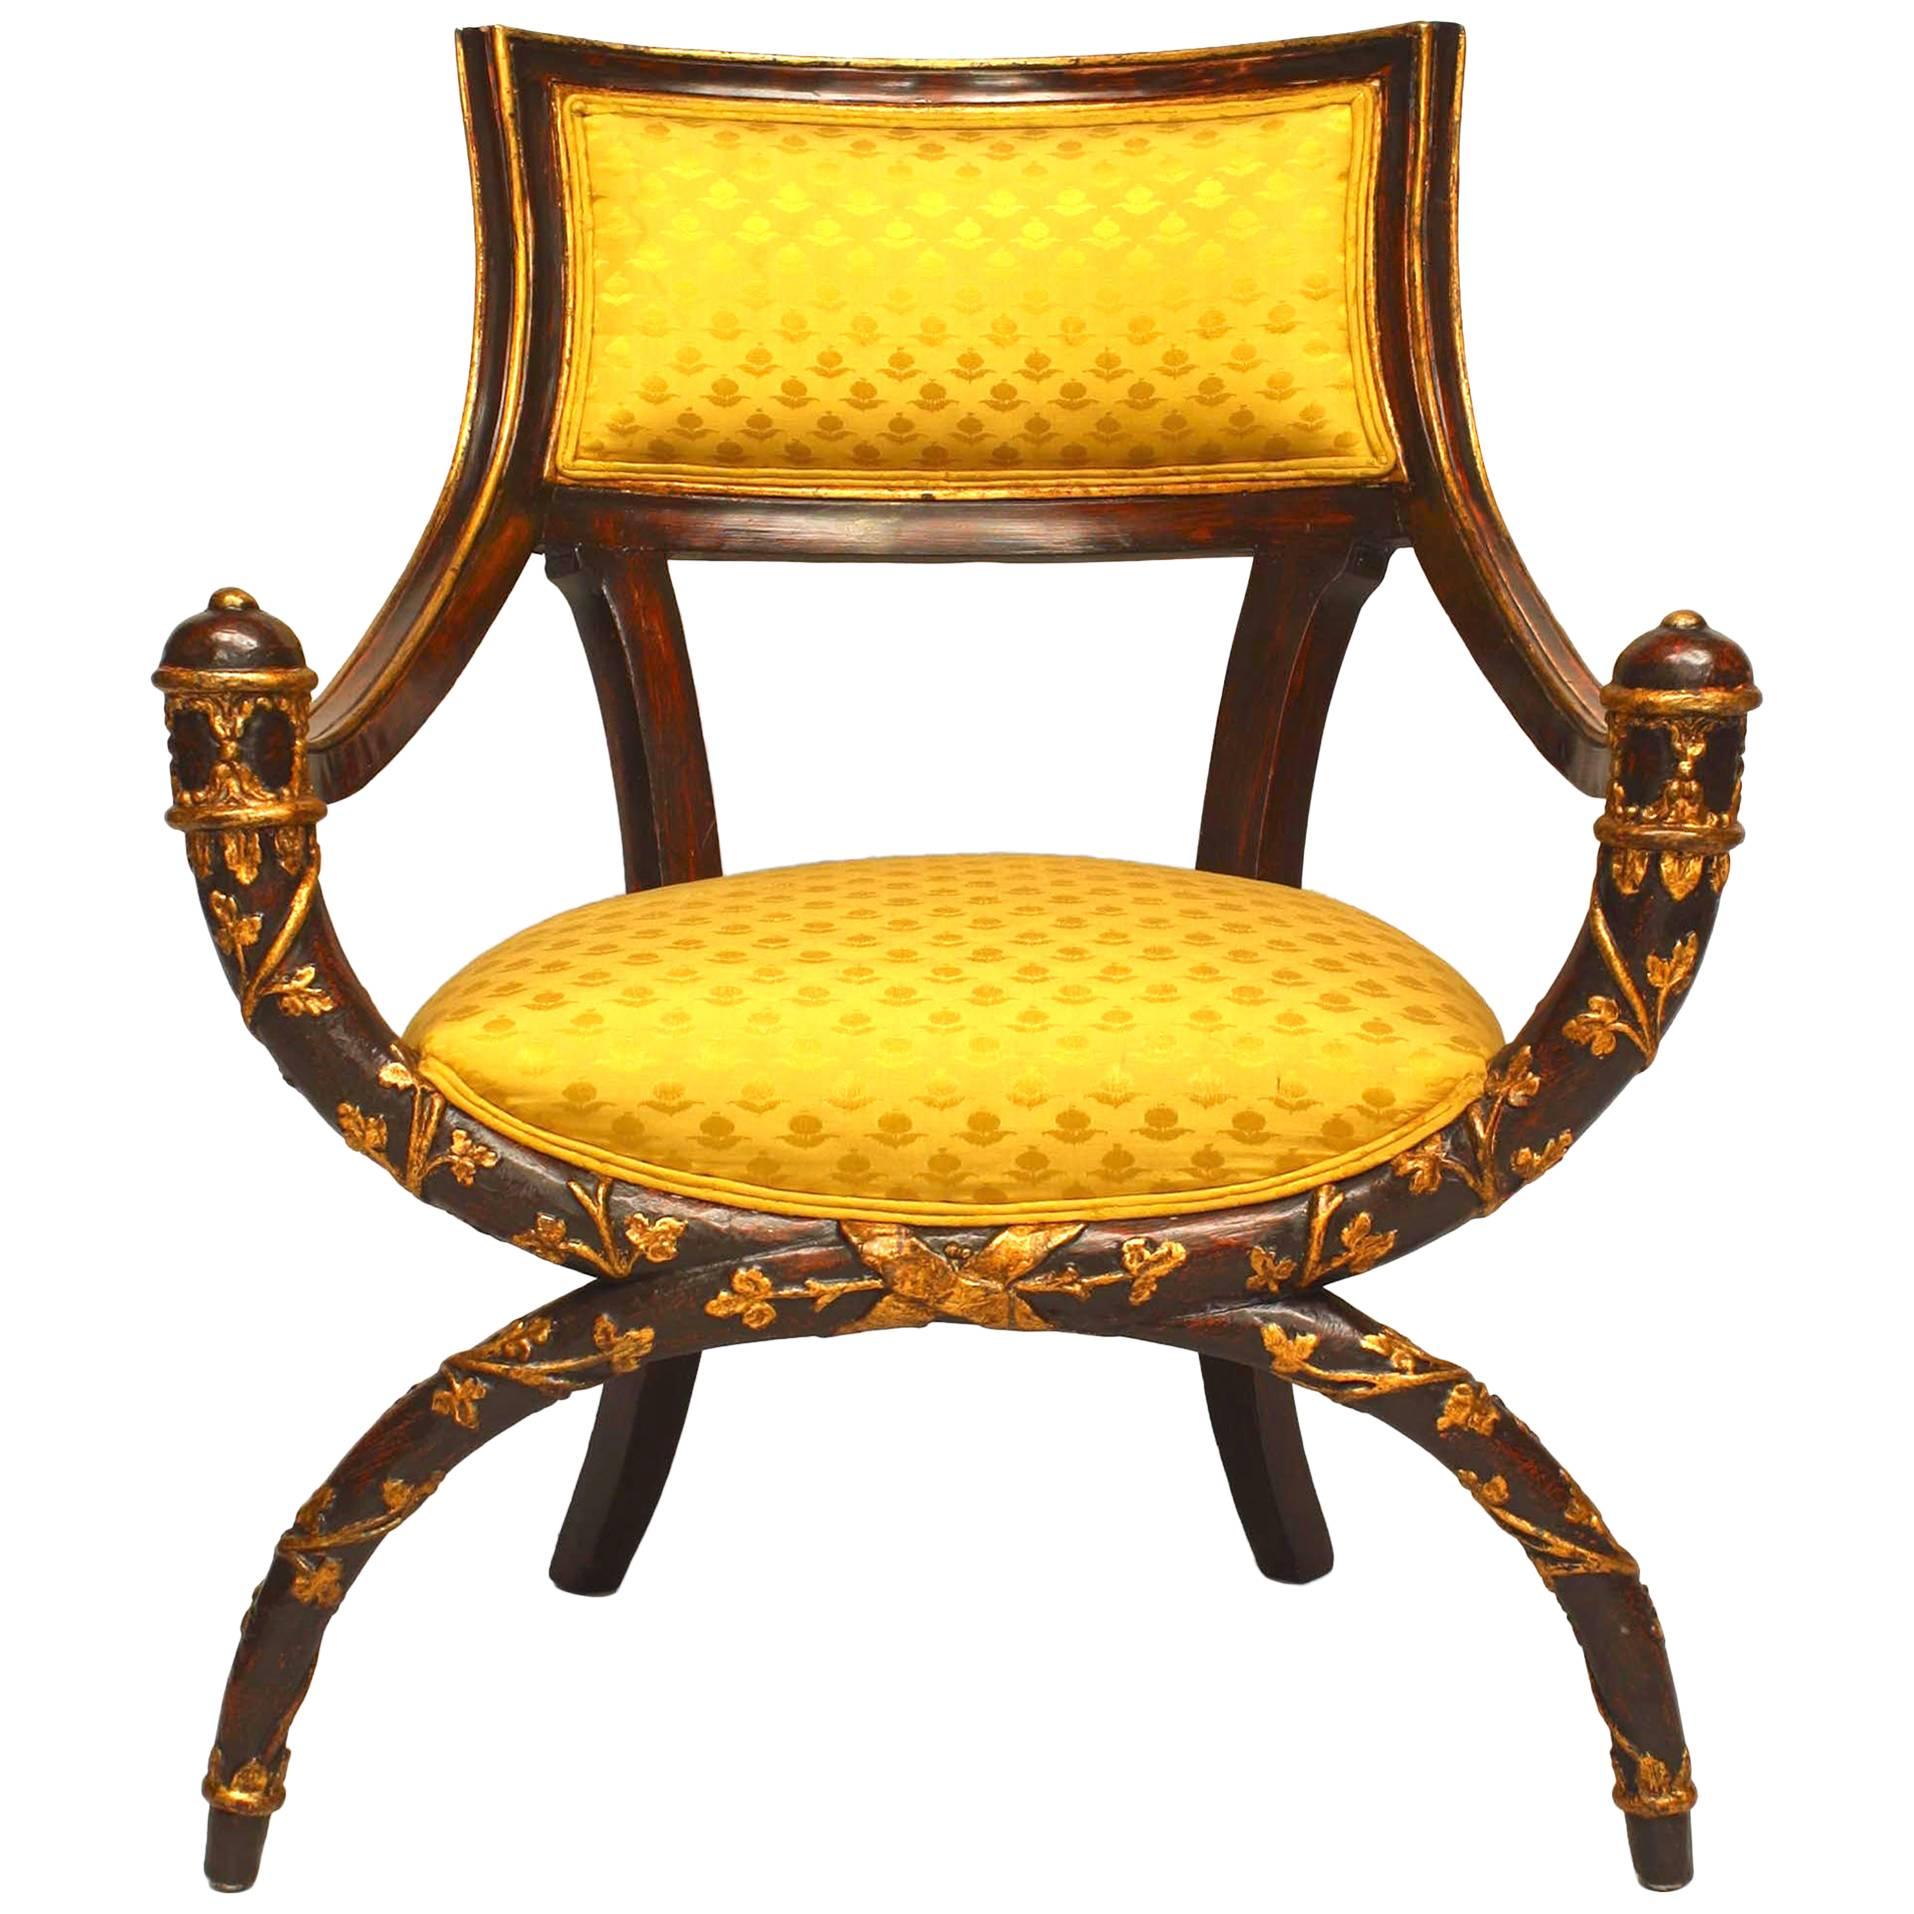 Italian Neoclassic Maroon Lacquer and Gold Damask Upholstery Armchair